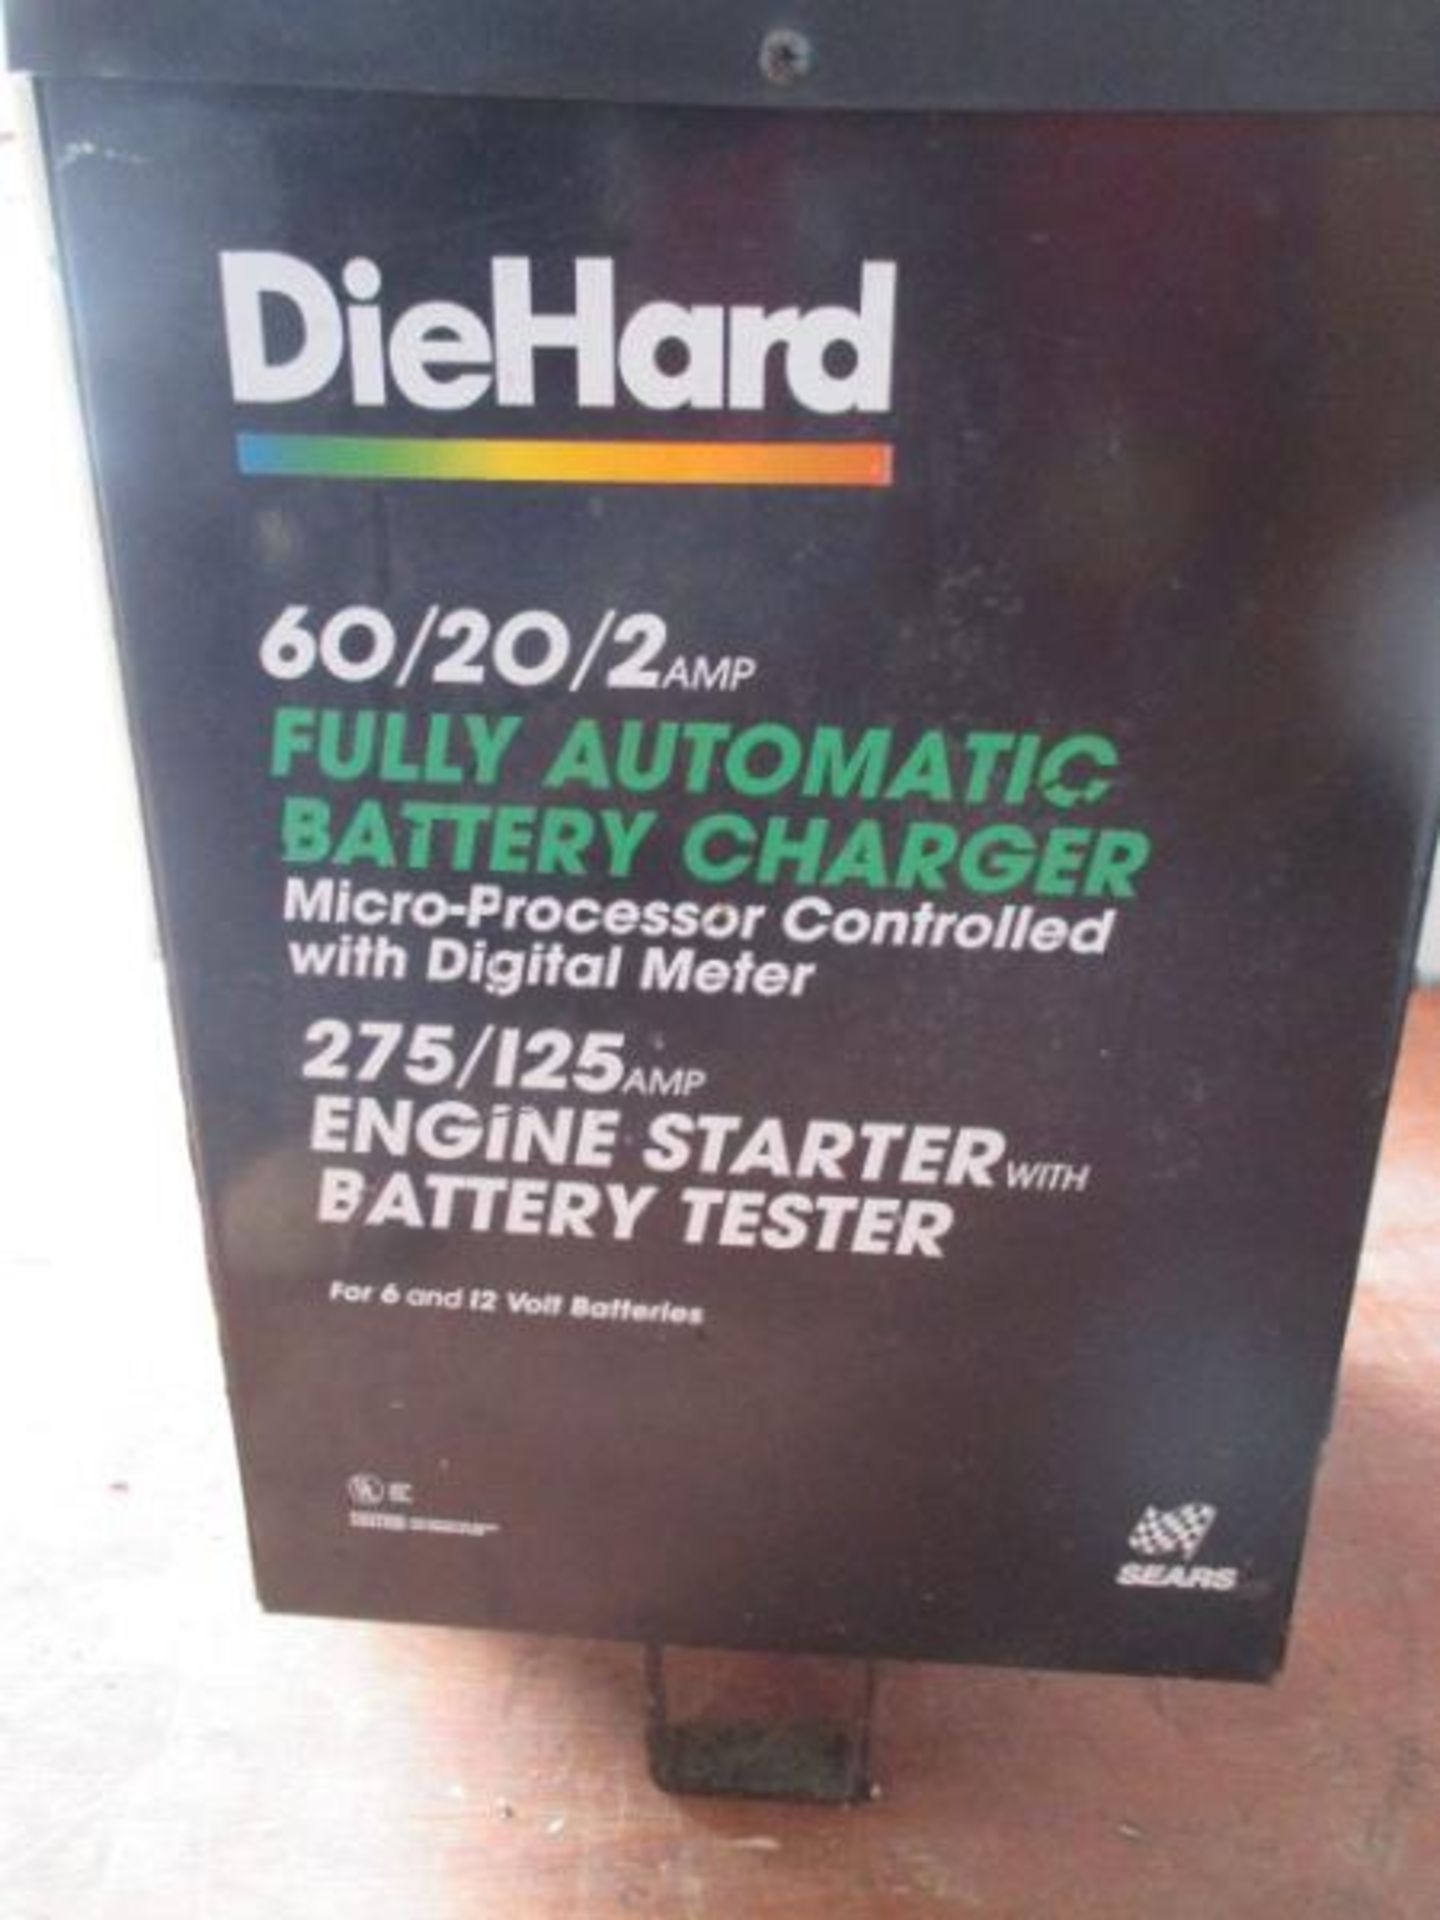 Die Hard 60 / 20 / 2 Amp Fully automatic Battery Charger, Micro Processor Controlled w/ Digital - Image 3 of 6